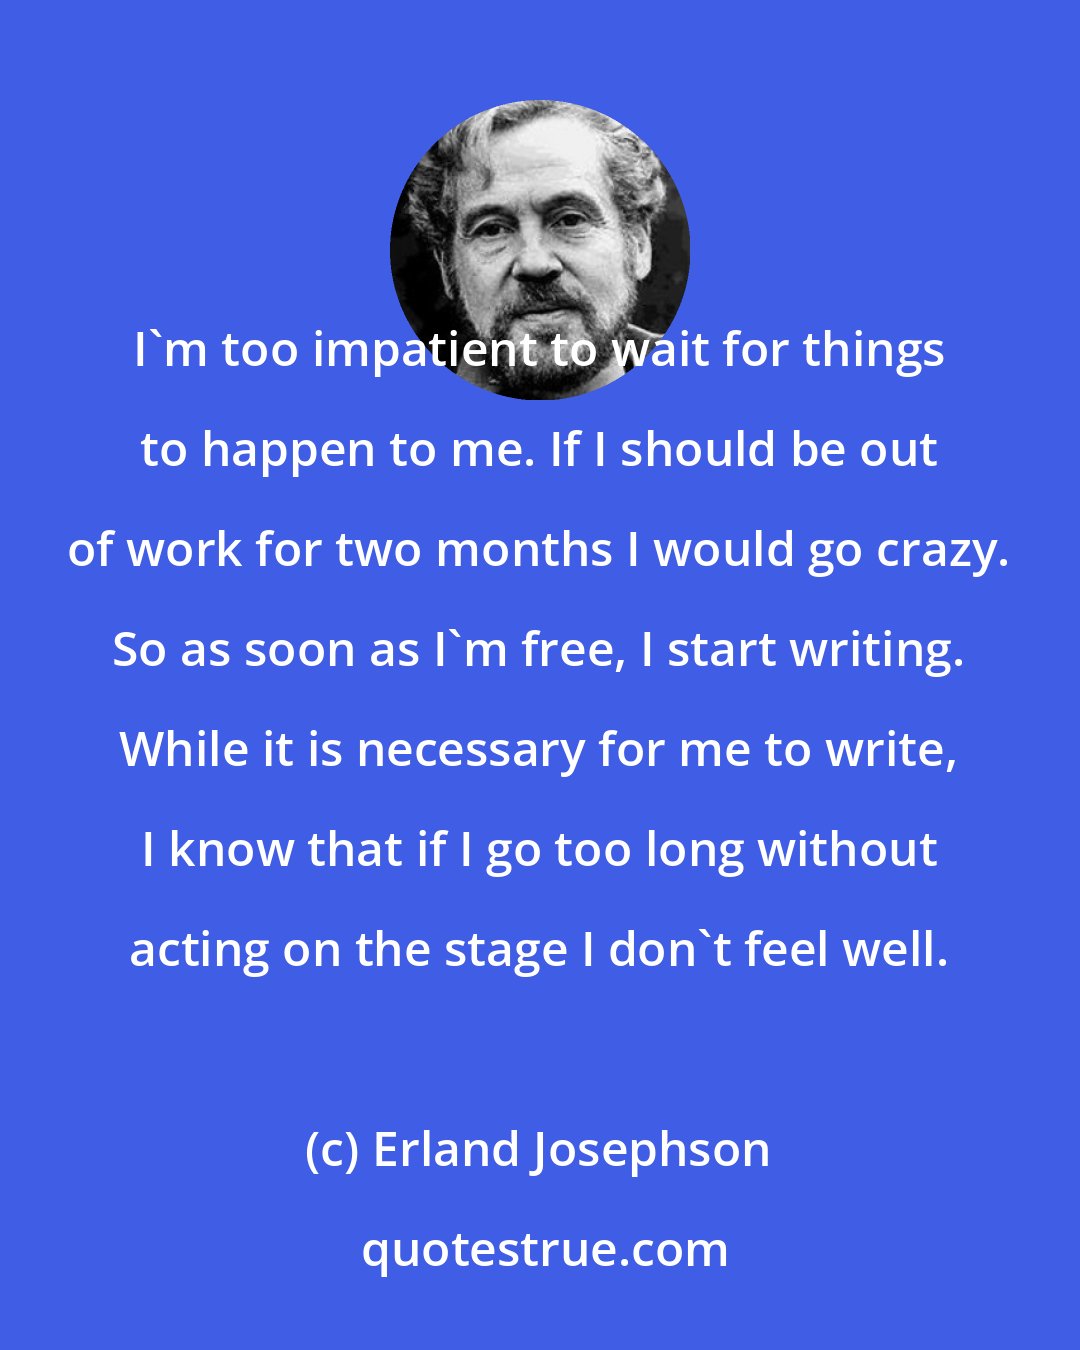 Erland Josephson: I'm too impatient to wait for things to happen to me. If I should be out of work for two months I would go crazy. So as soon as I'm free, I start writing. While it is necessary for me to write, I know that if I go too long without acting on the stage I don't feel well.